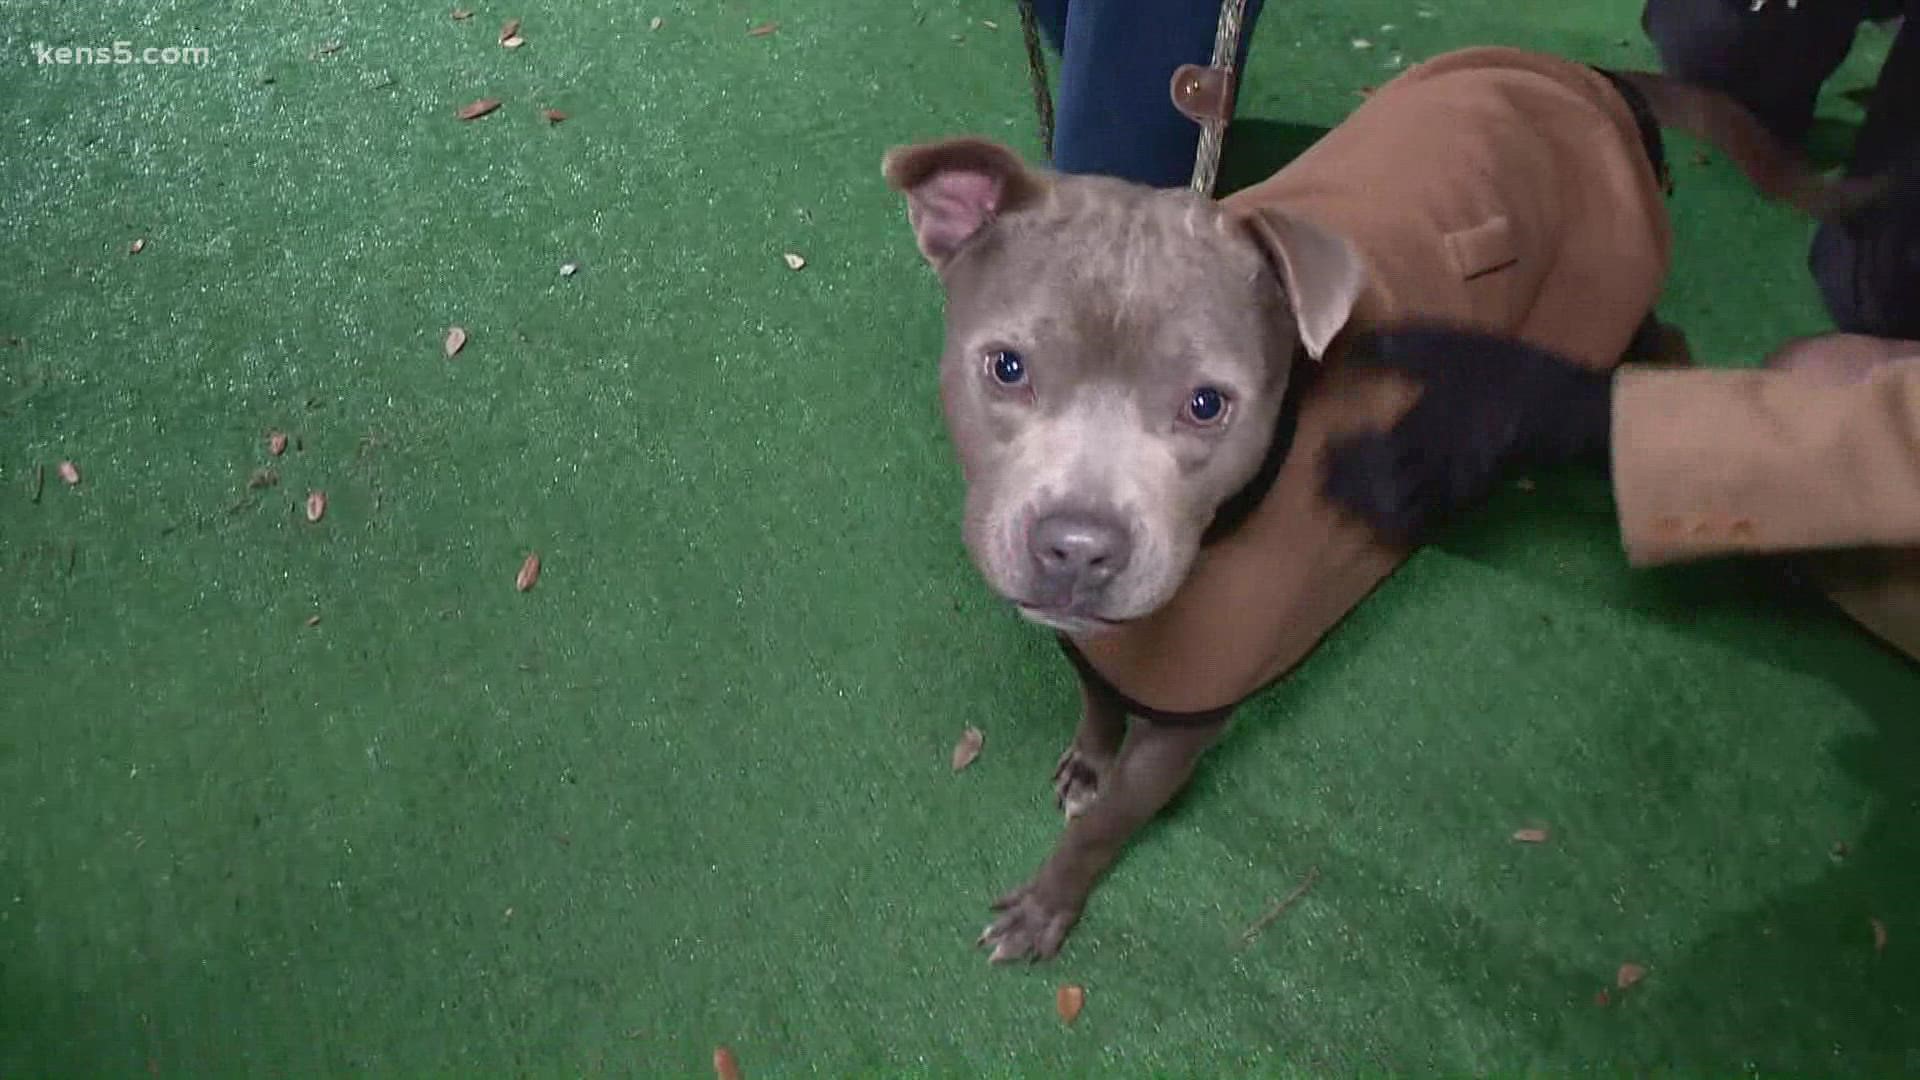 The 5-year-old dog is available for adoption through the San Antonio Humane Society.